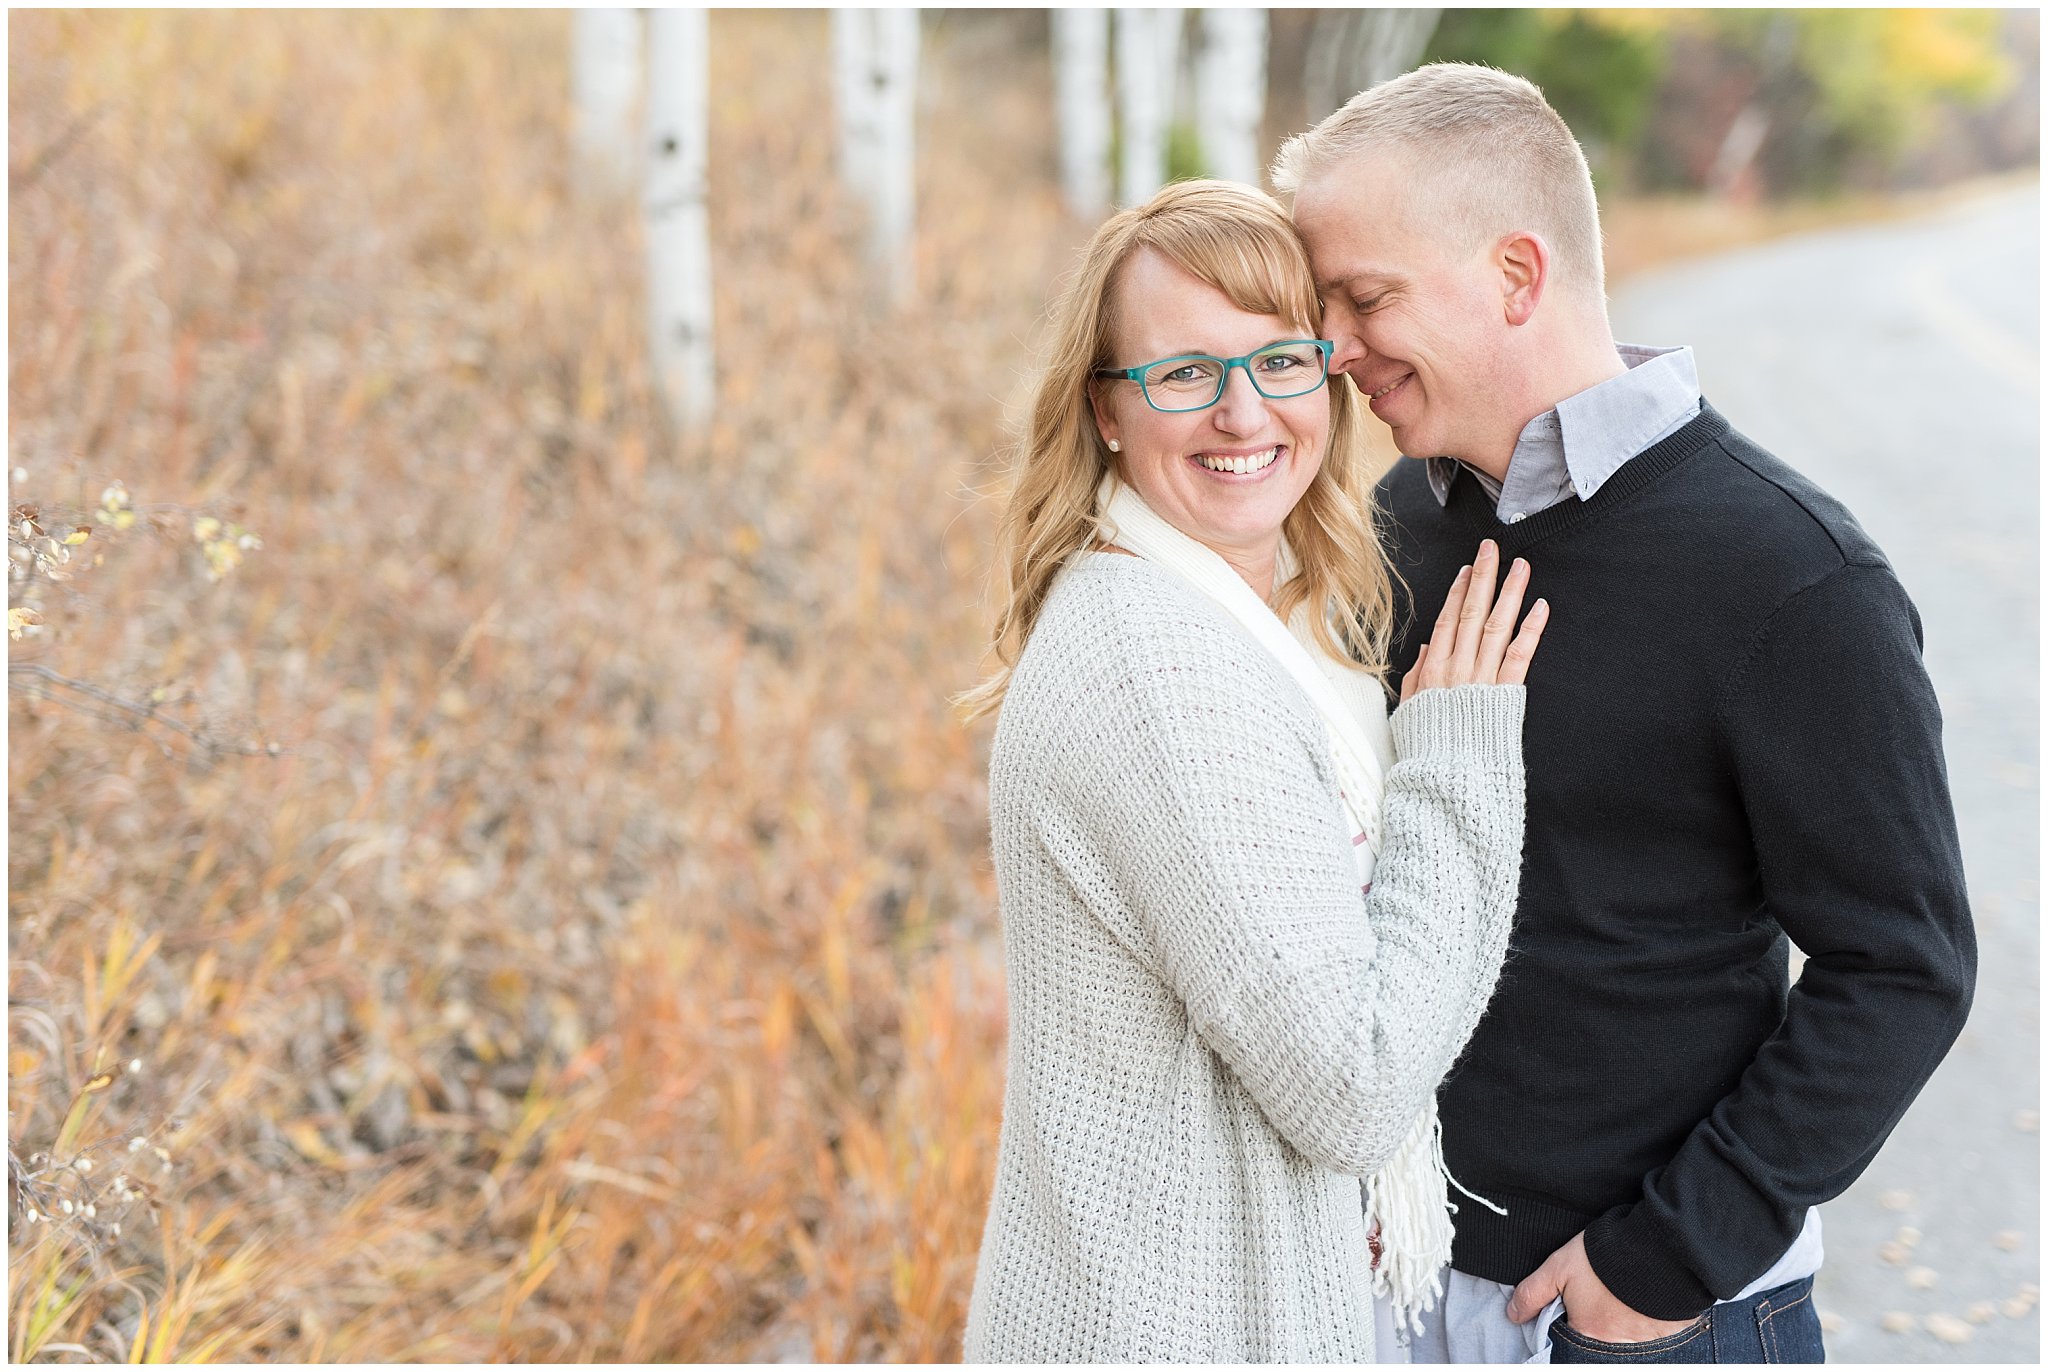 Couple nuzzling in the aspen trees | Fall Family Pictures in the Mountains | Snowbasin, Utah | Jessie and Dallin Photography